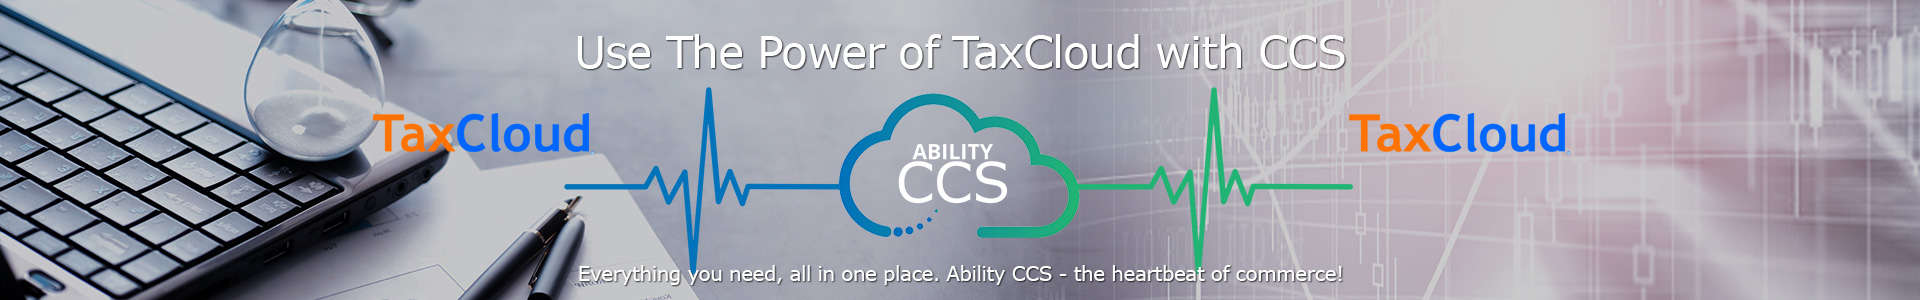 Use The Power of TaxCloud with CCS